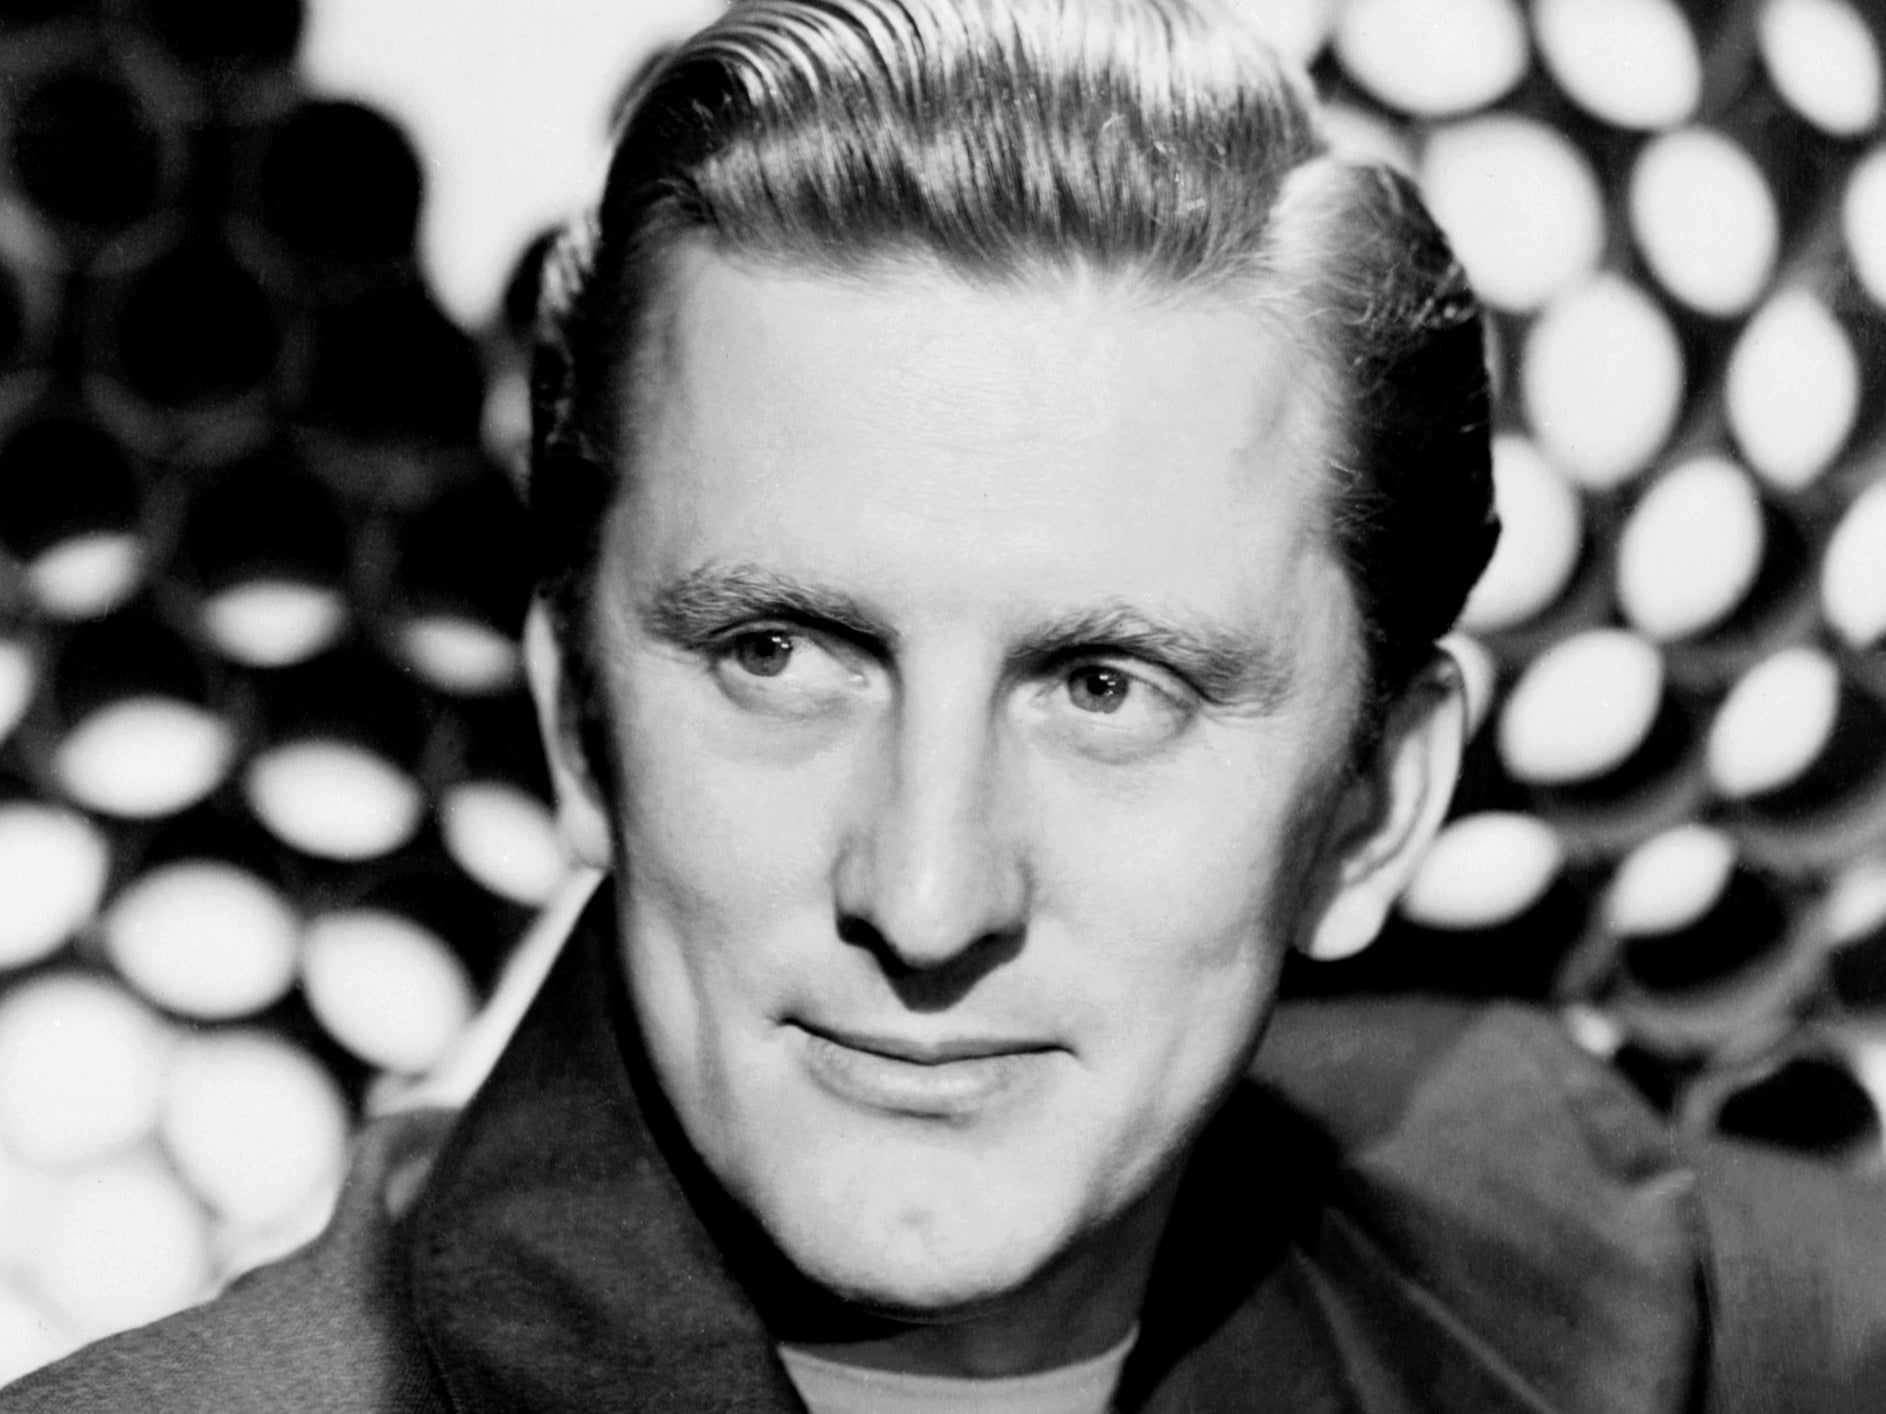 Kirk Douglas pushed his way from an impoverished childhood to become one of the world's biggest movie stars